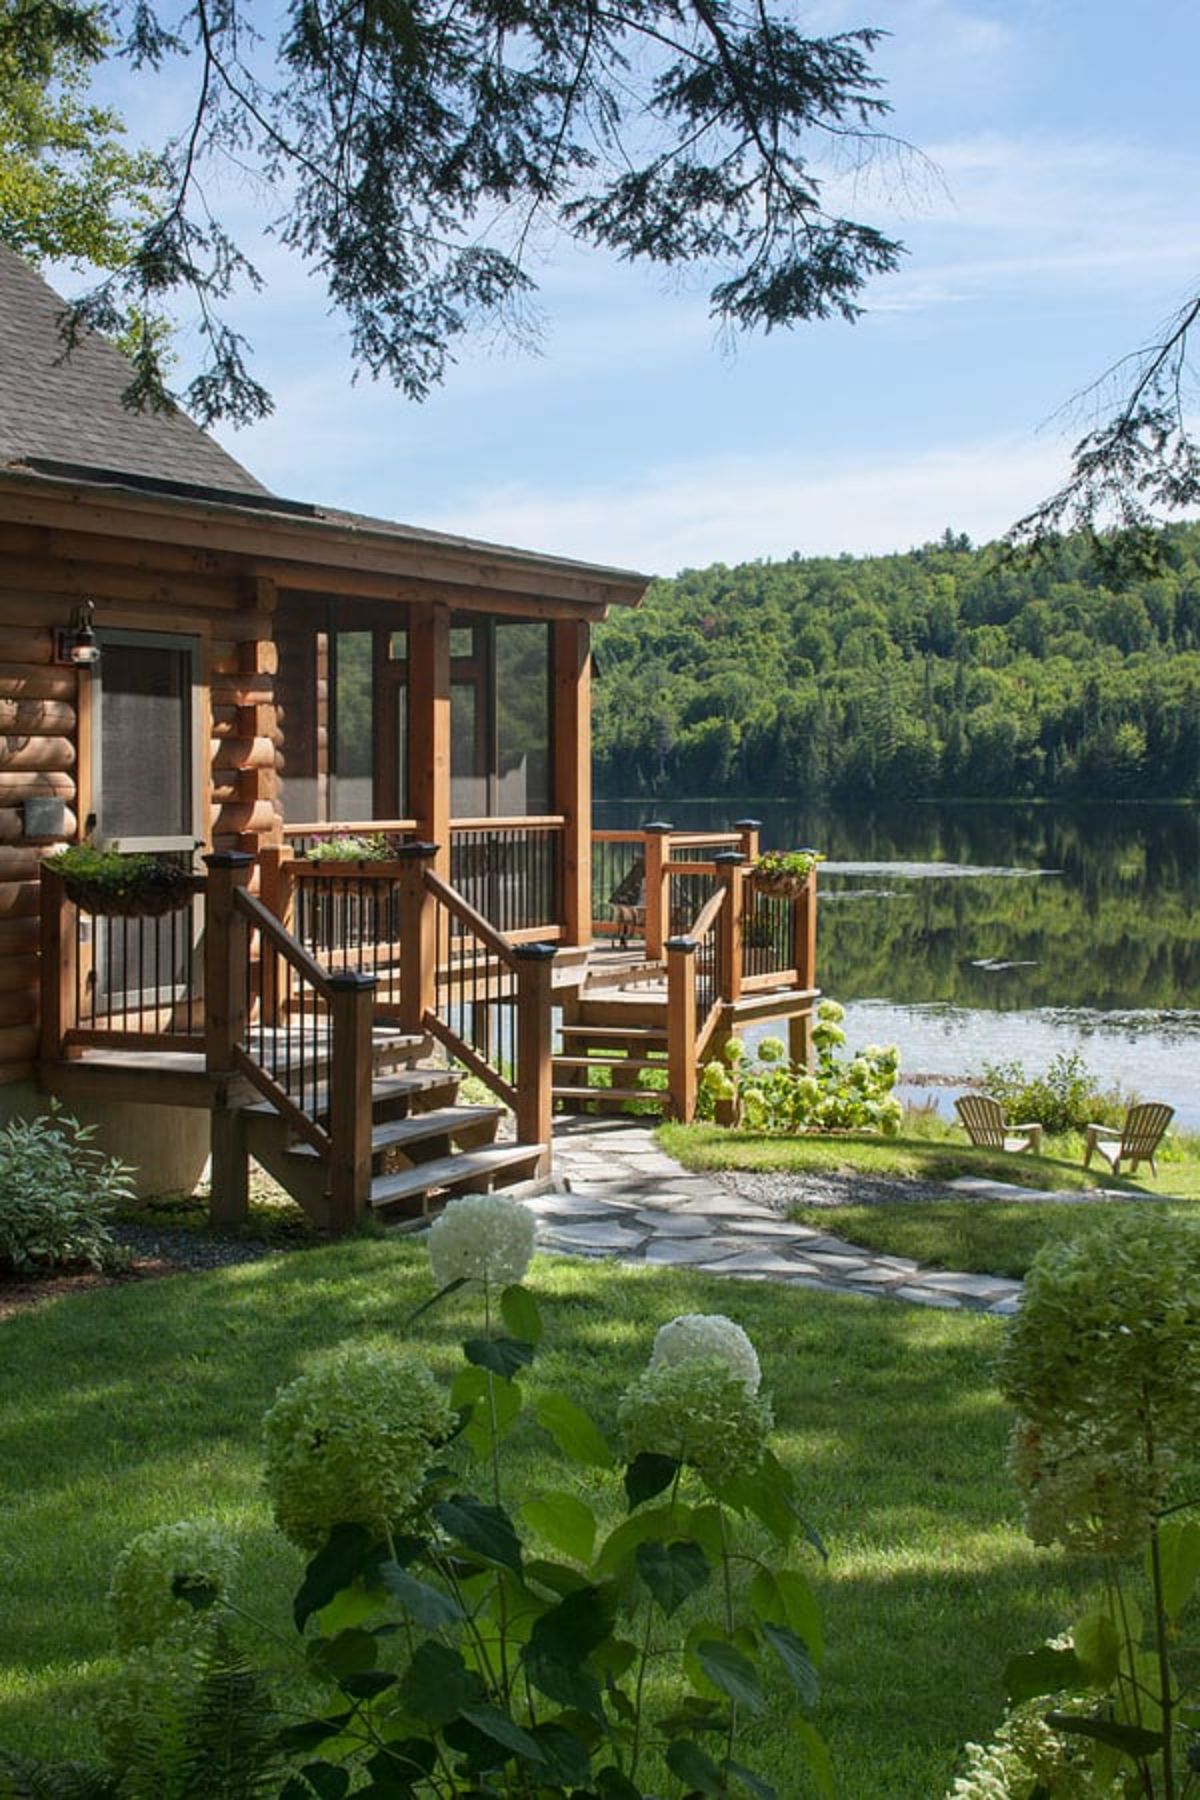 small porch on side of log cabin with stone walkway overlooking pond in background